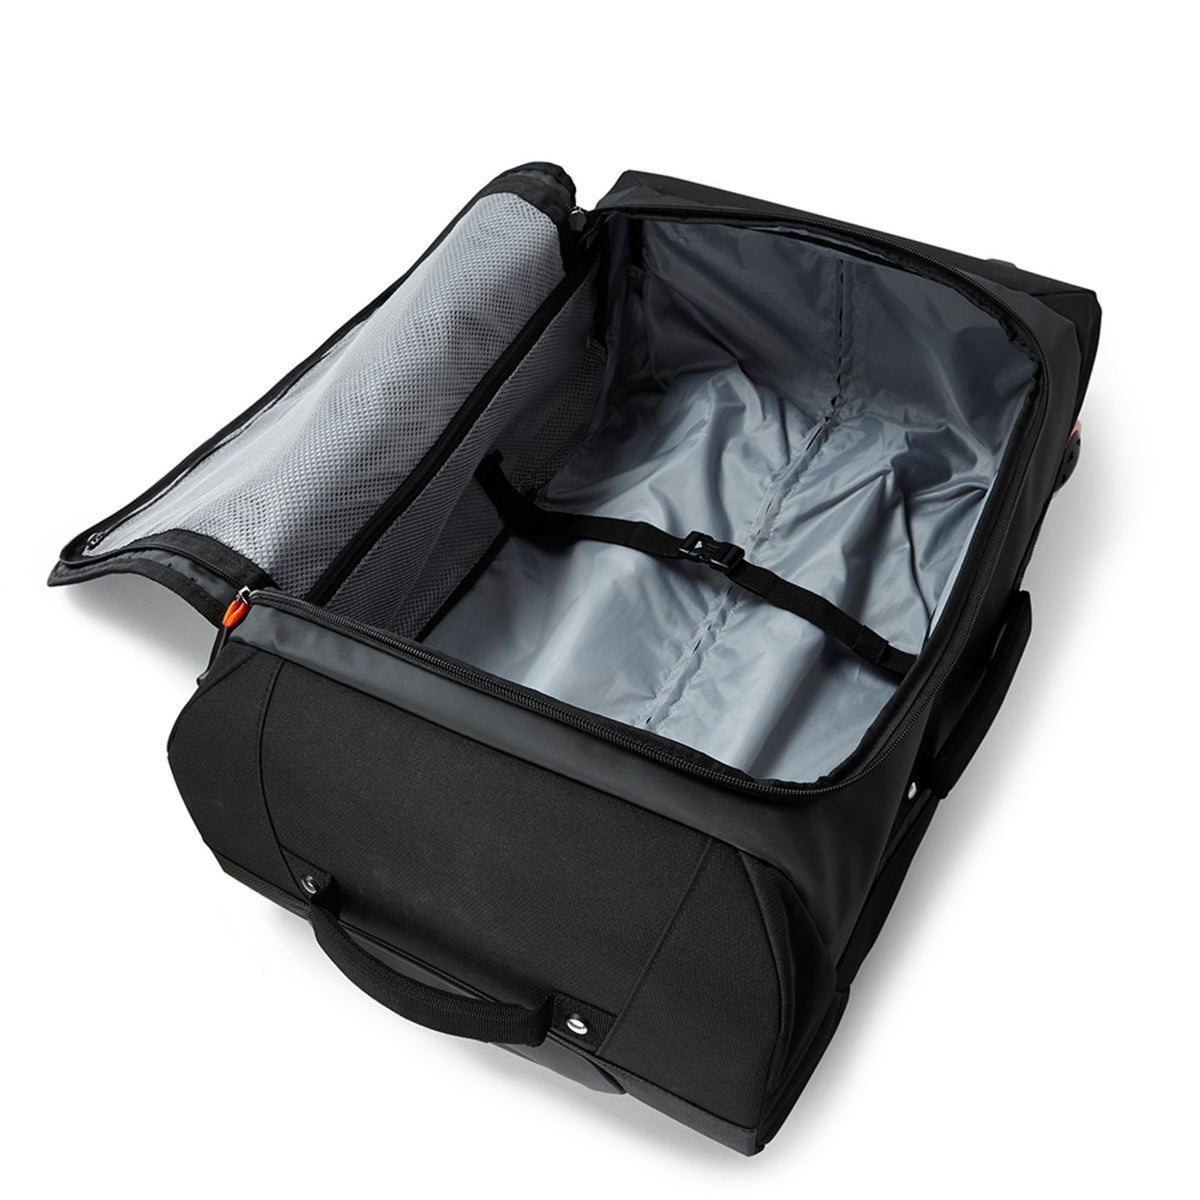 GILL Rolling Carry On Bag - Black